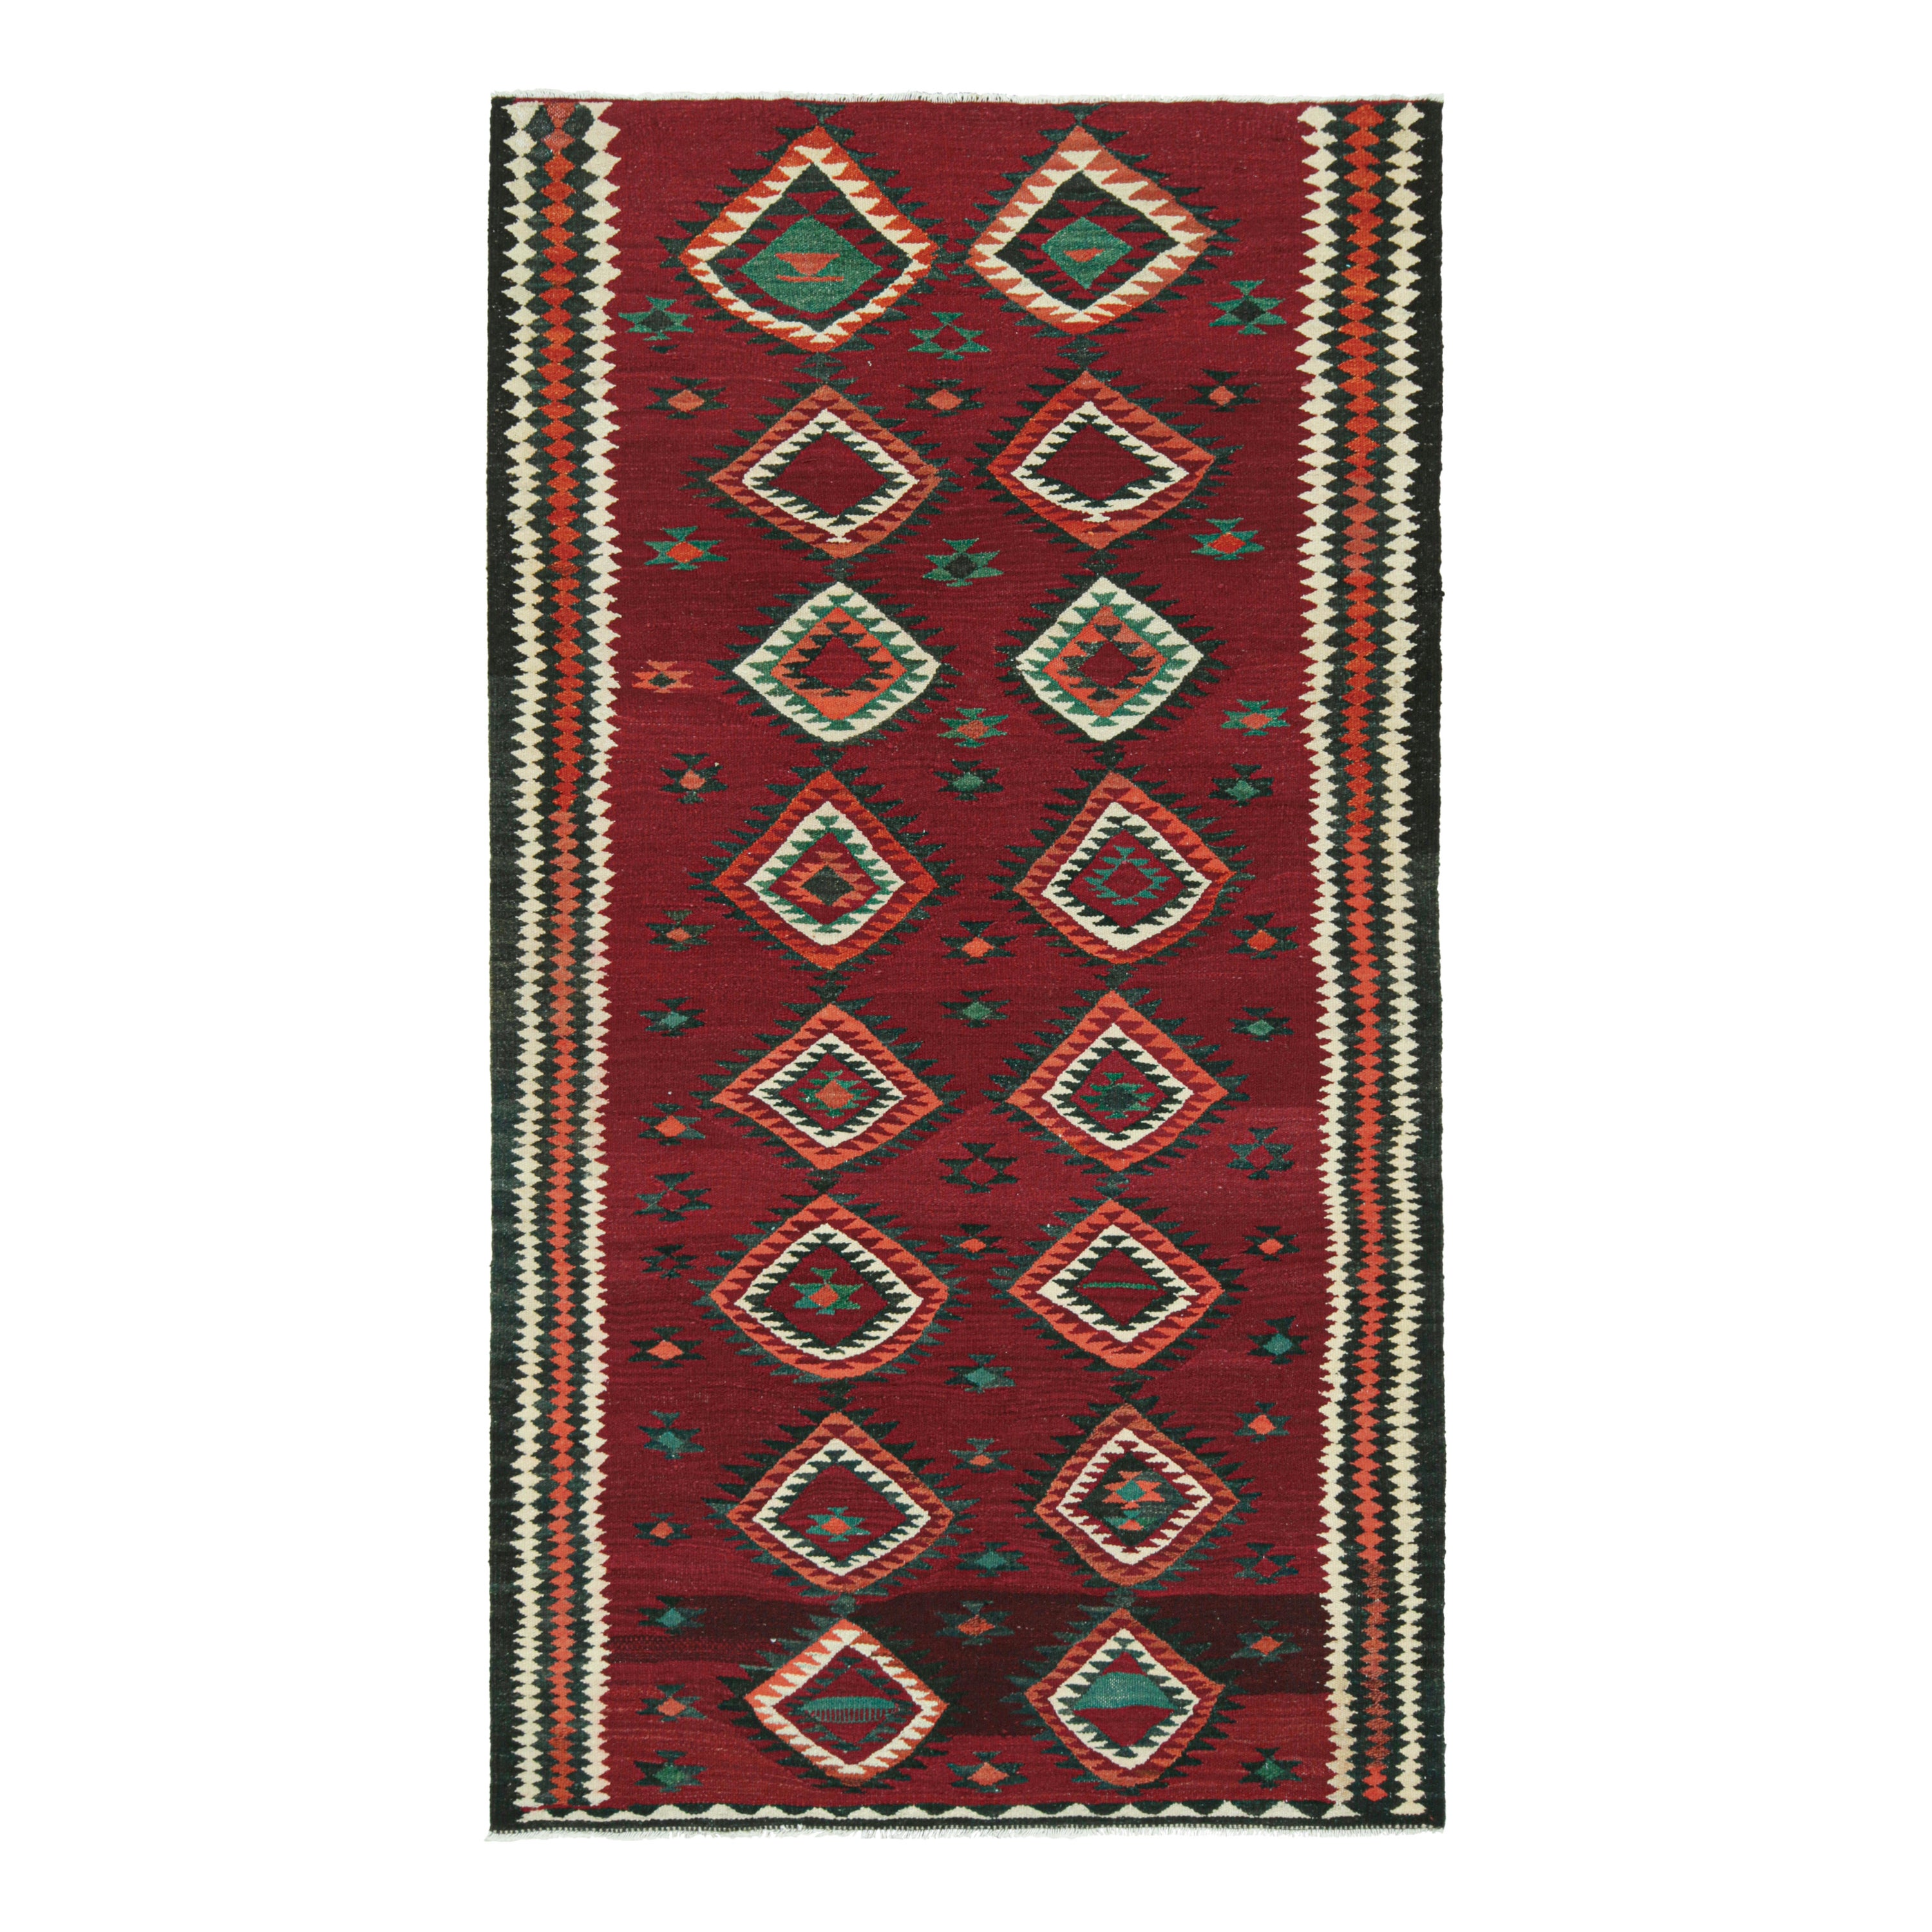 Vintage Kurdish Persian Kilim in Red with Medallion Patterns by Rug & Kilim For Sale